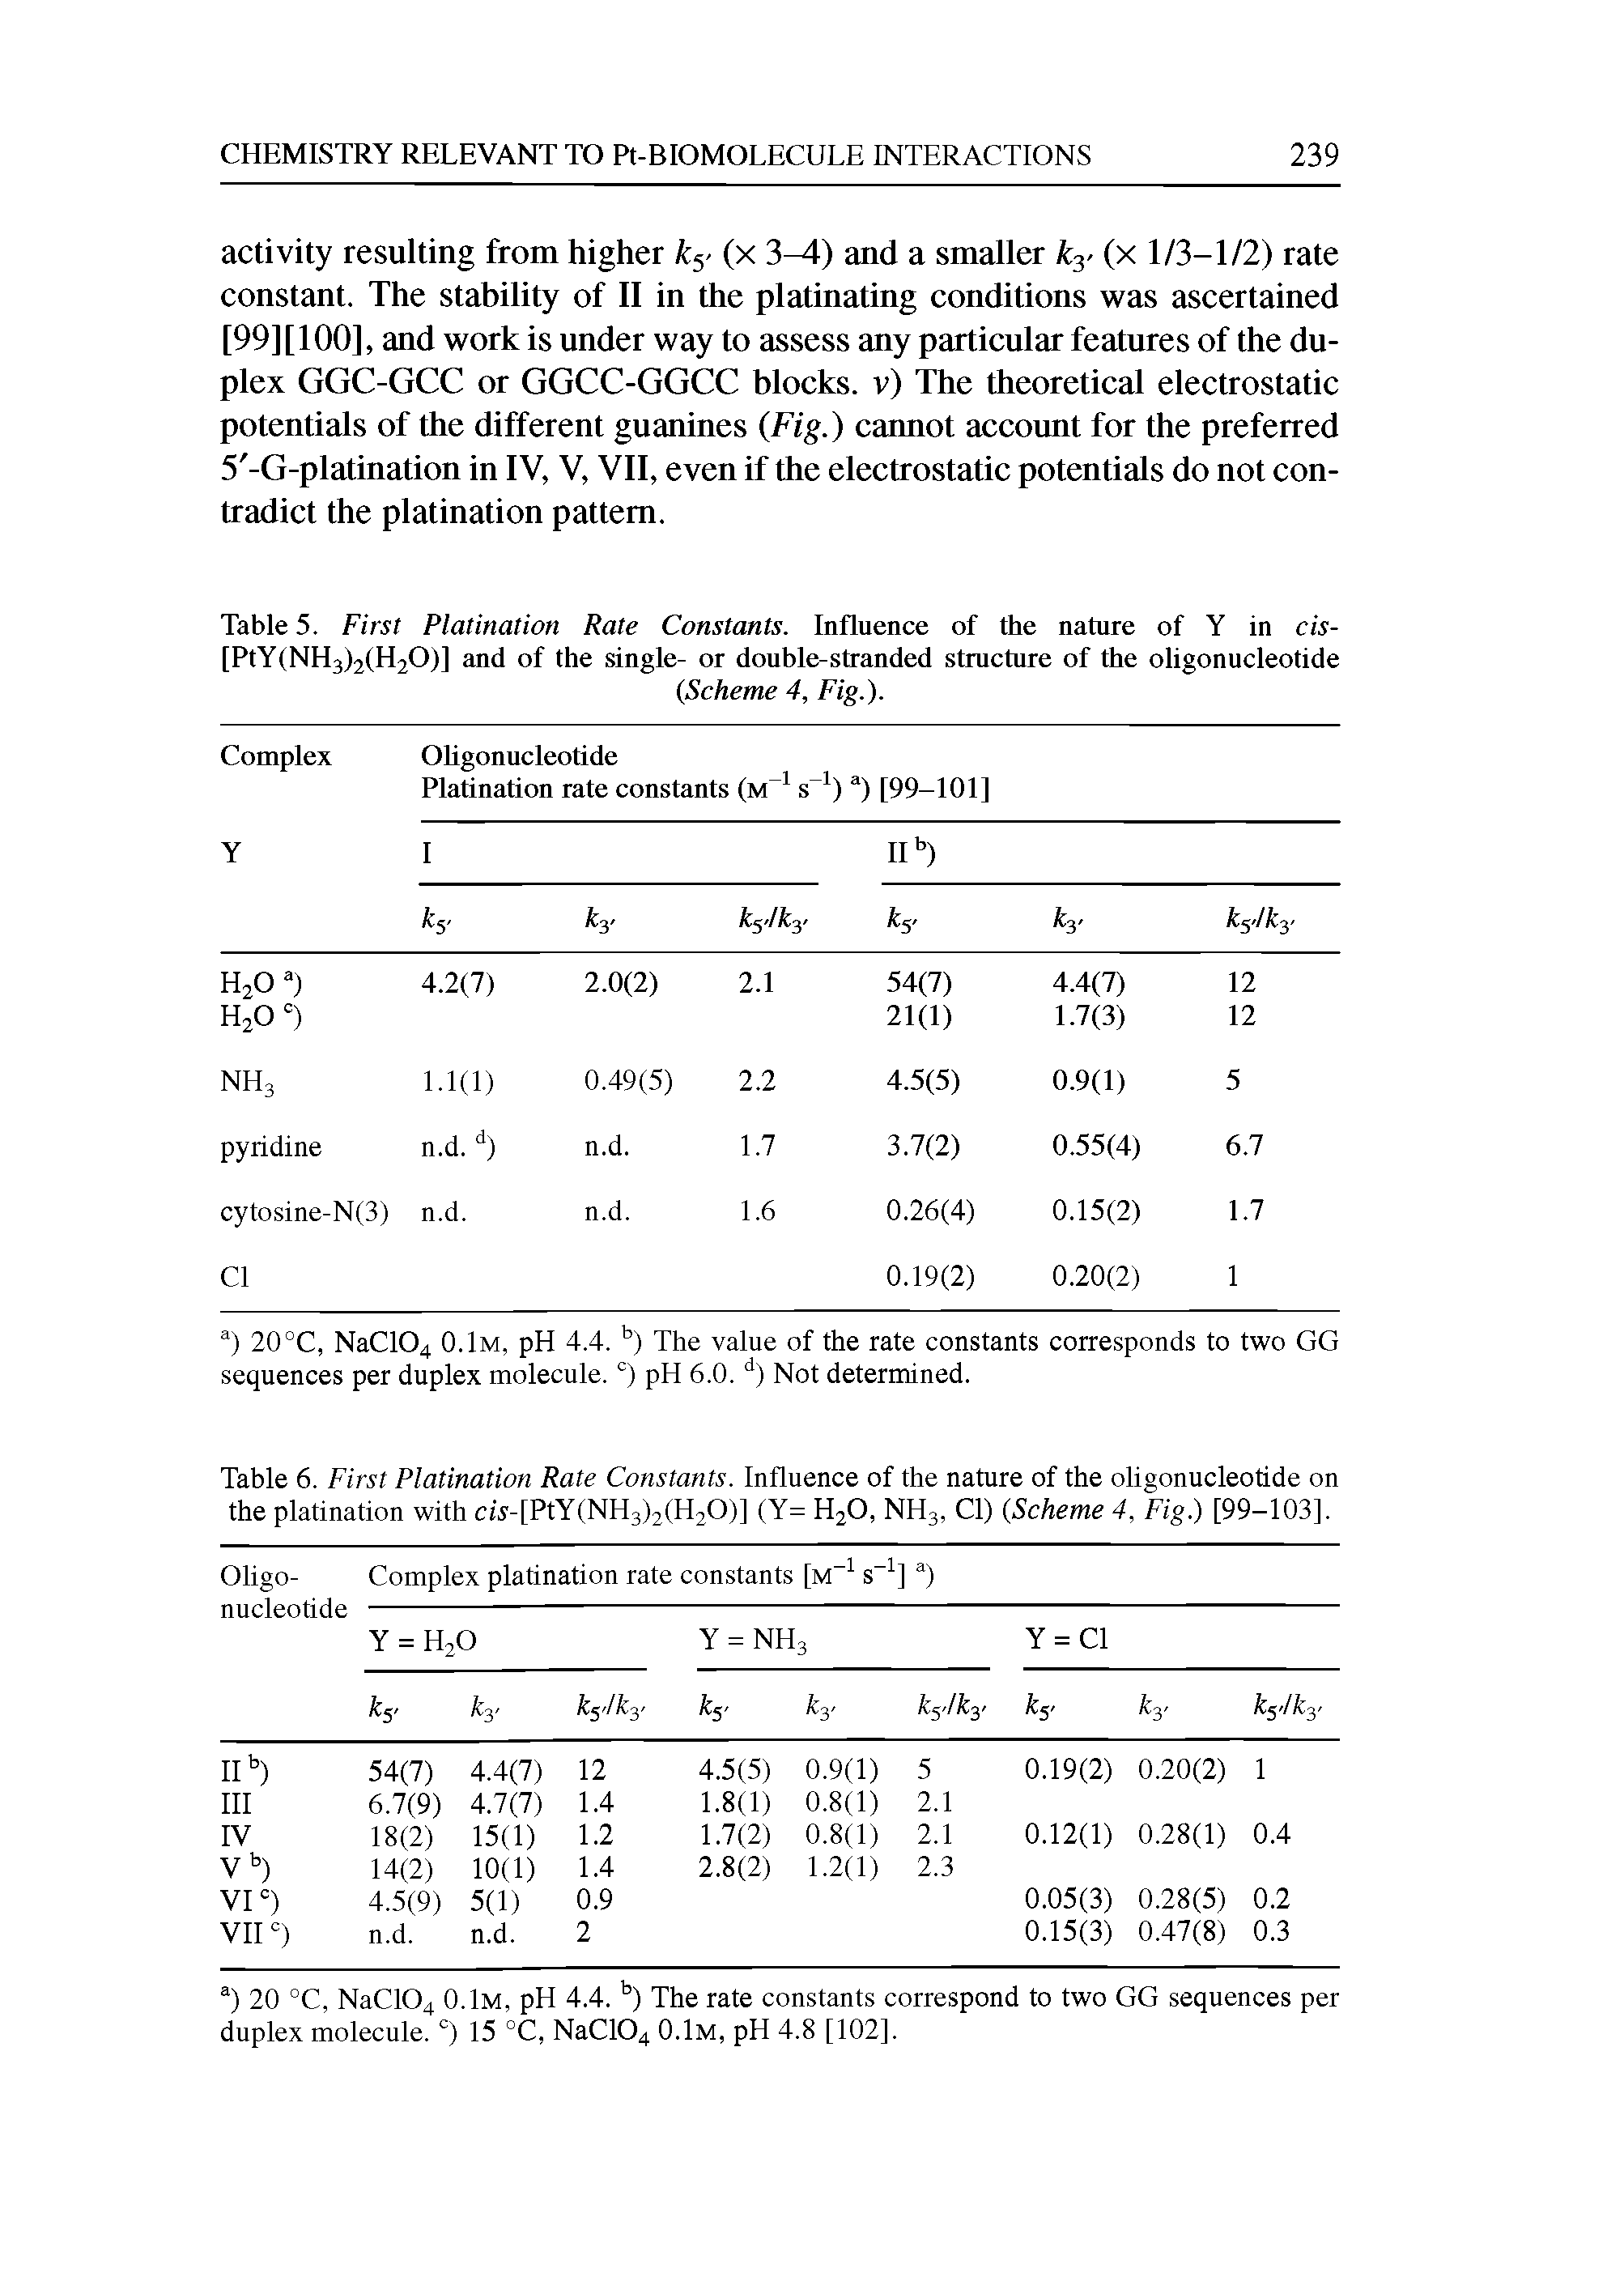 Table 6. First Platination Rate Constants. Influence of the nature of the oligonucleotide on the platination with c V[PtY(NH3)2(H20)] (Y= H20, NH3, Cl) Scheme 4, Fig.) [99-103],...